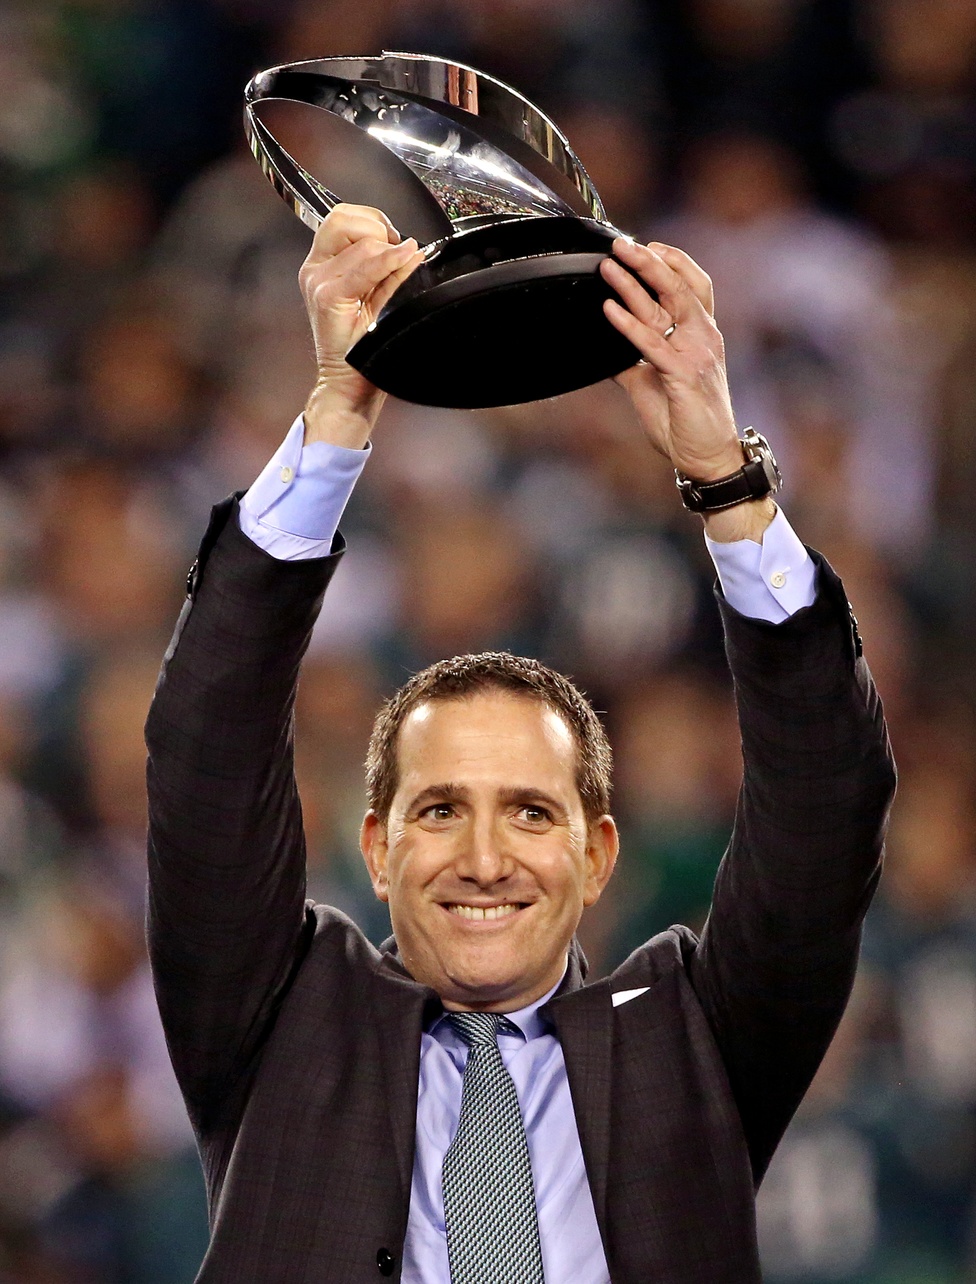 Howie Roseman, Non-Football Guy, Owns the NFL